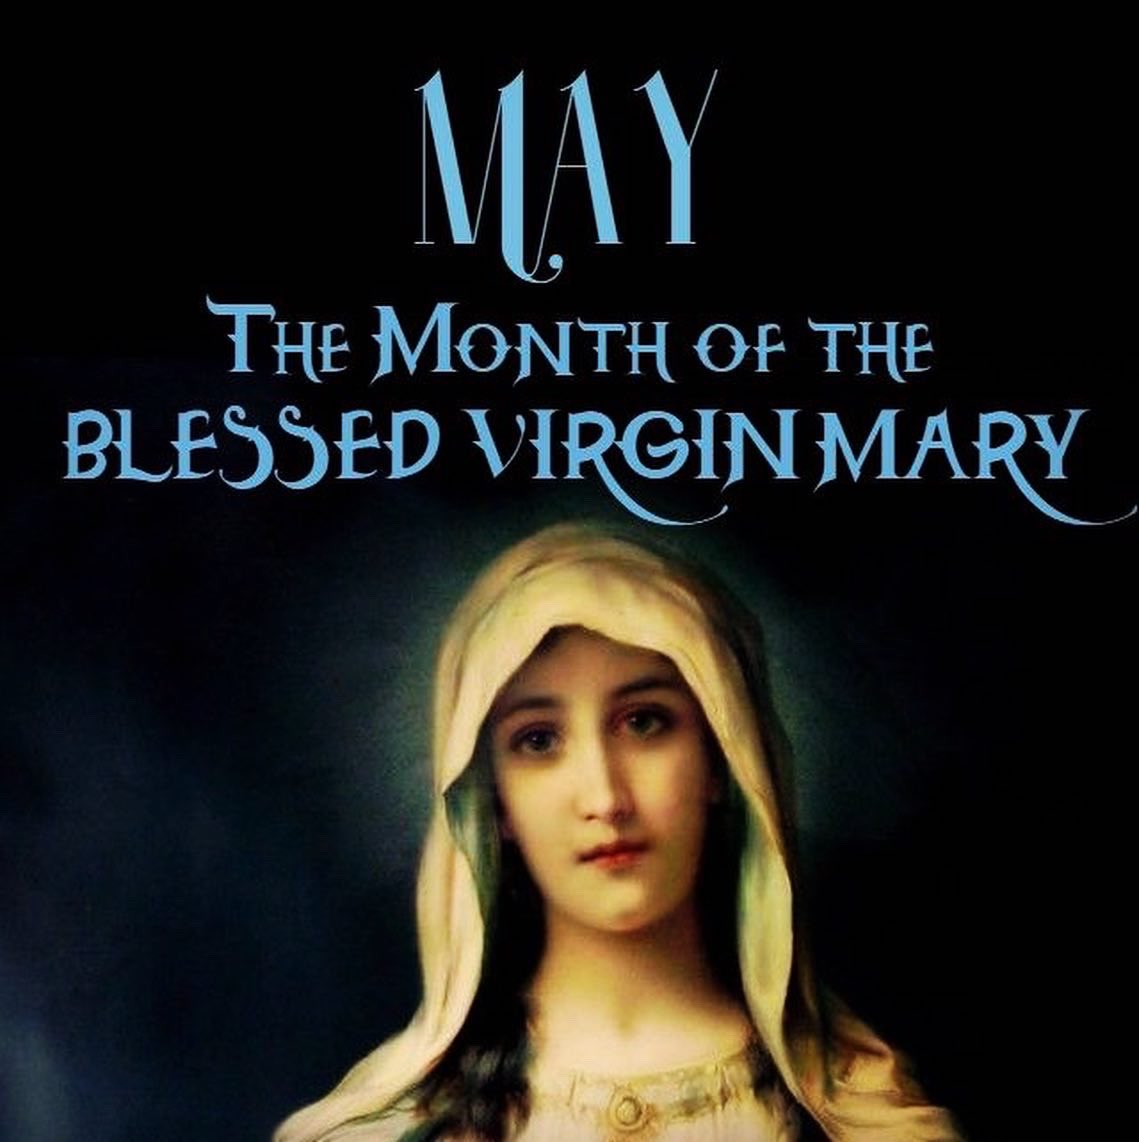 Catholics honor Mary. We don’t worship her. Do you honor your biologically mother by hanging a photo of her up and asking her for prayers on your behalf? Get it now? 😉